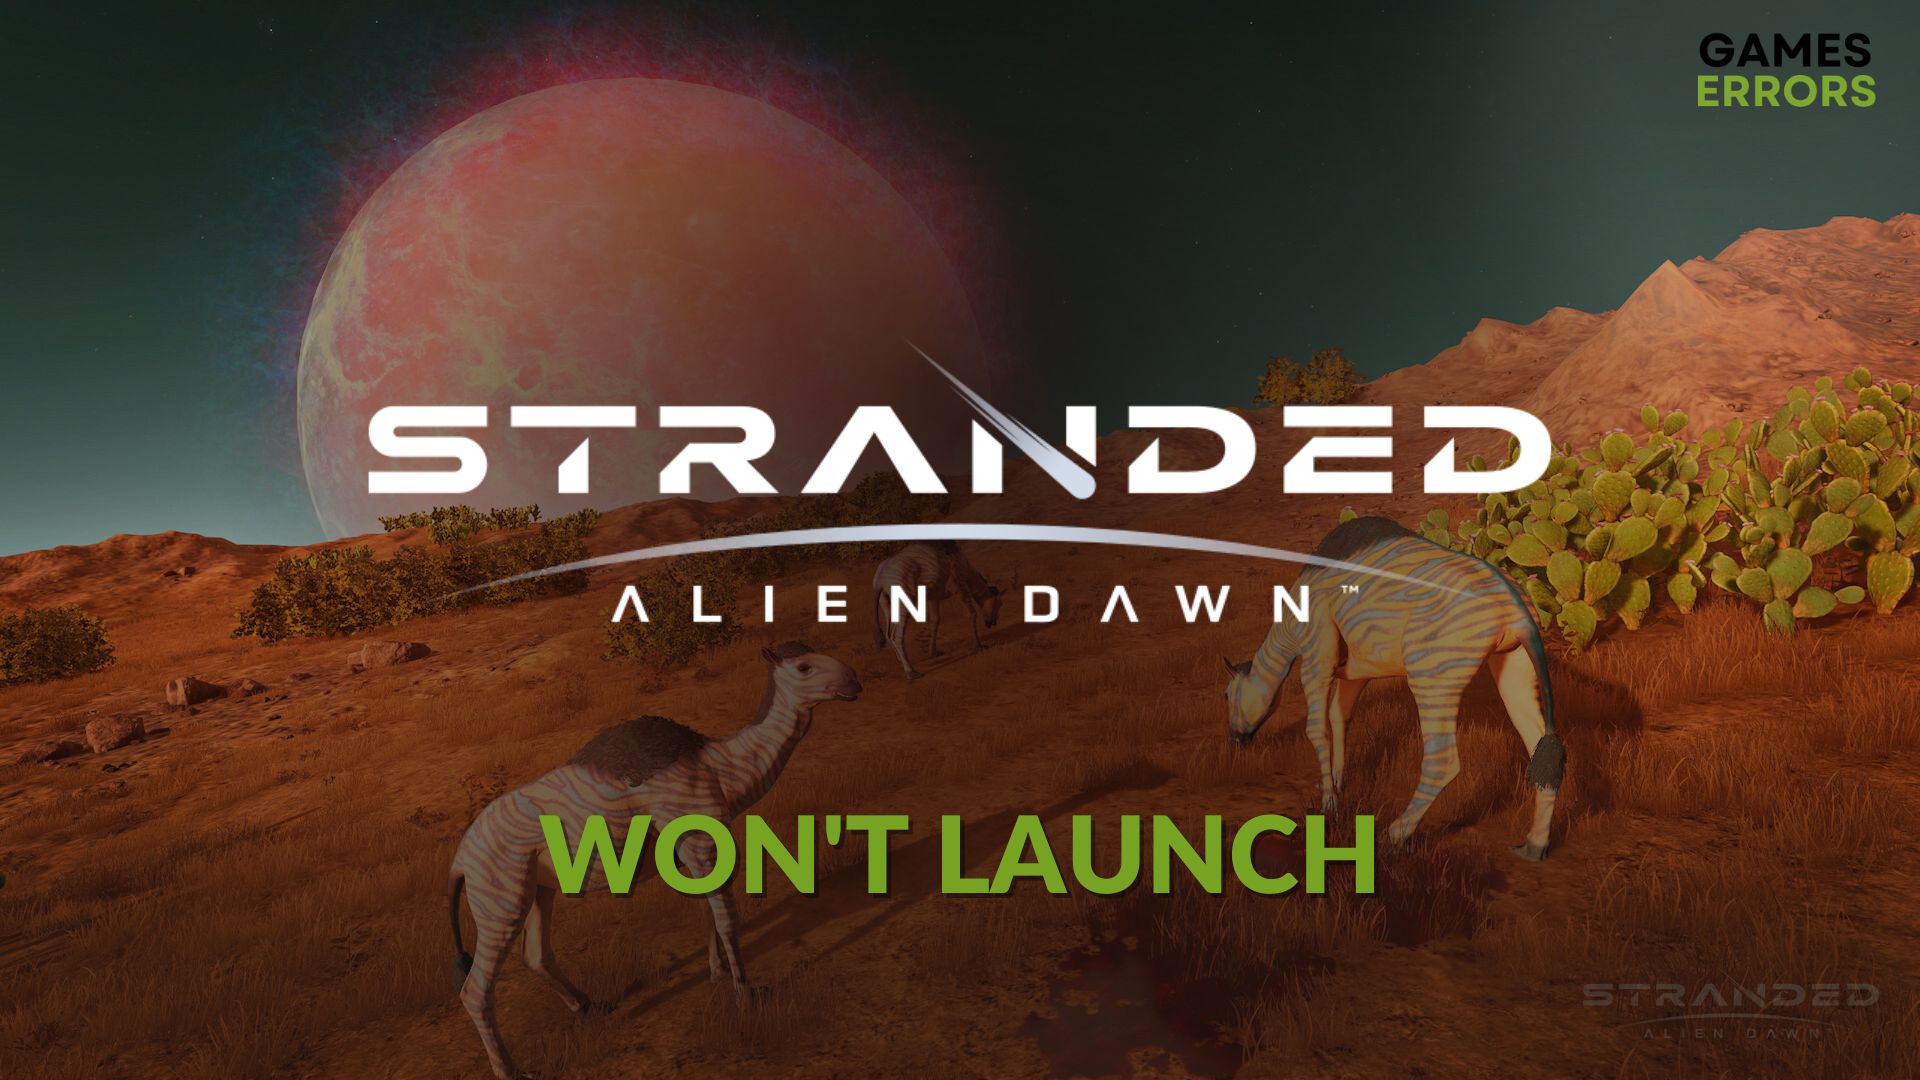 Game found to launch. Stranded: Alien Dawn.